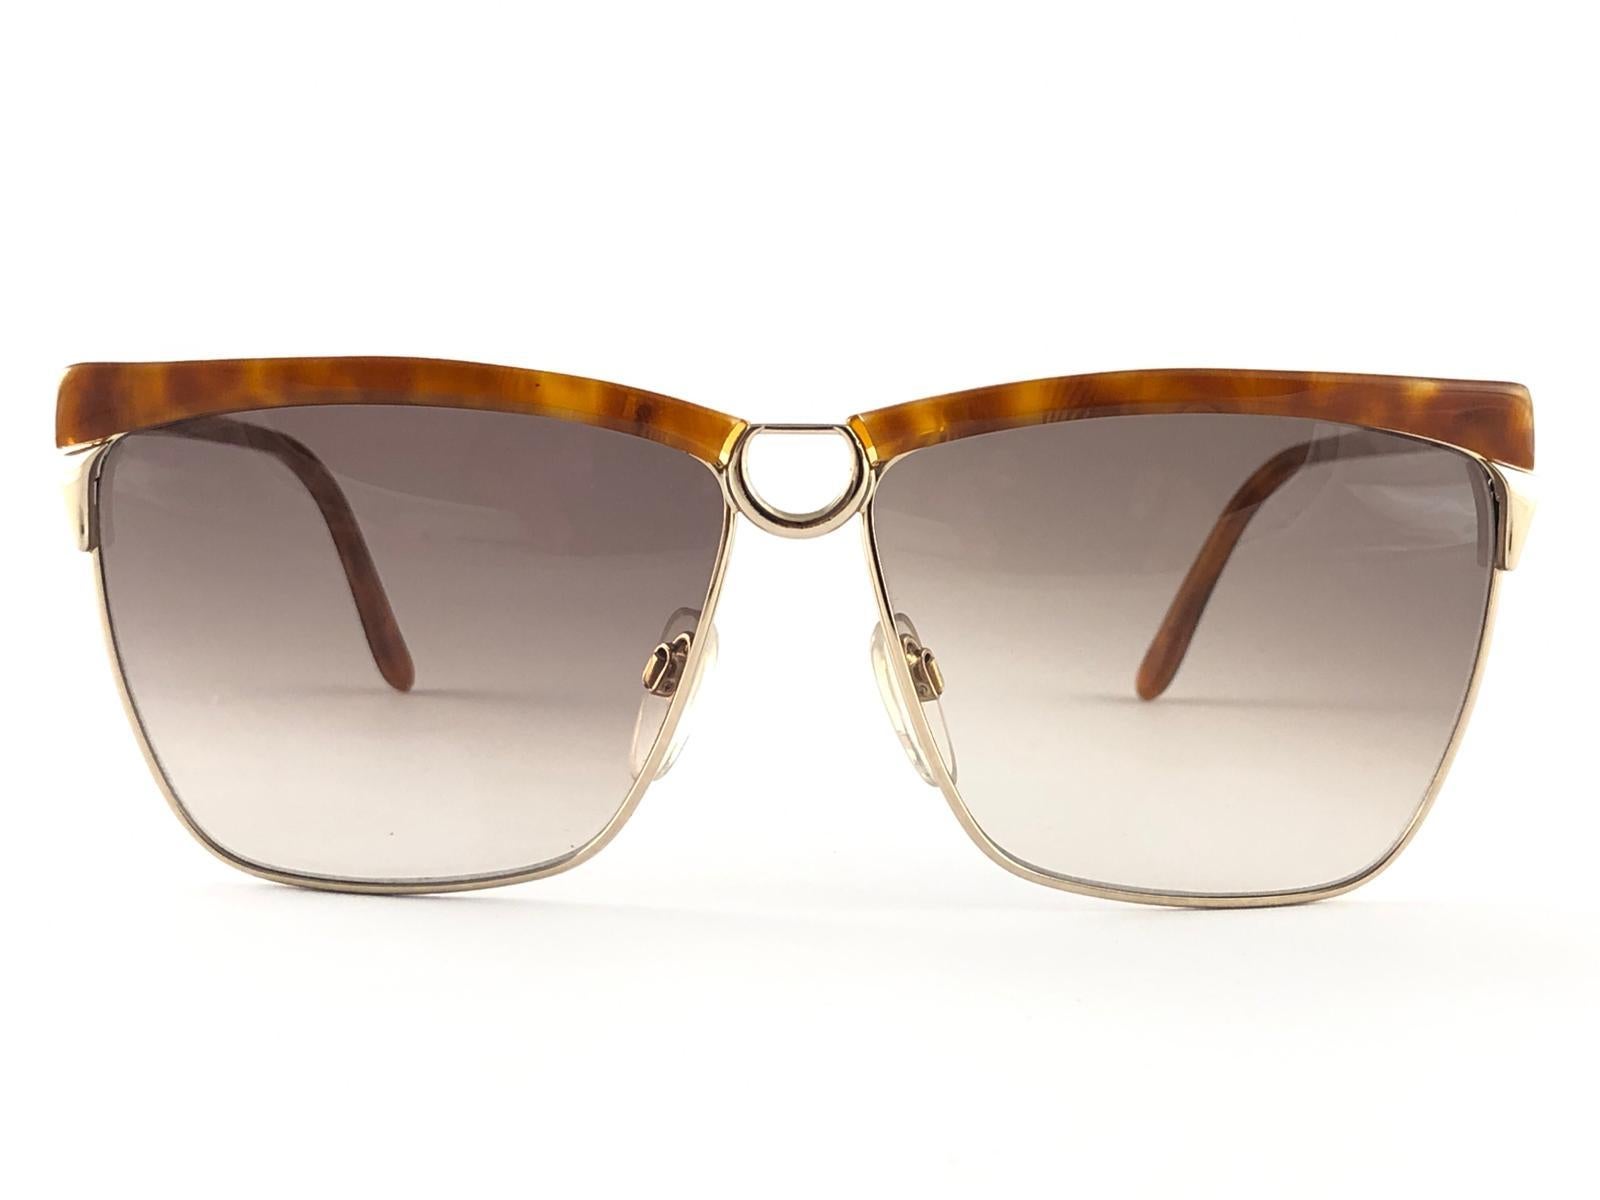 New Vintage Gucci Gold & Marbled Stunning Frame with brown gradient lenses. 
New never worn or displayed. 
This item could show minor sign of wear due to nearly 30 years of storage. Made in Italy.

Front                         14     cm
Lense Hight